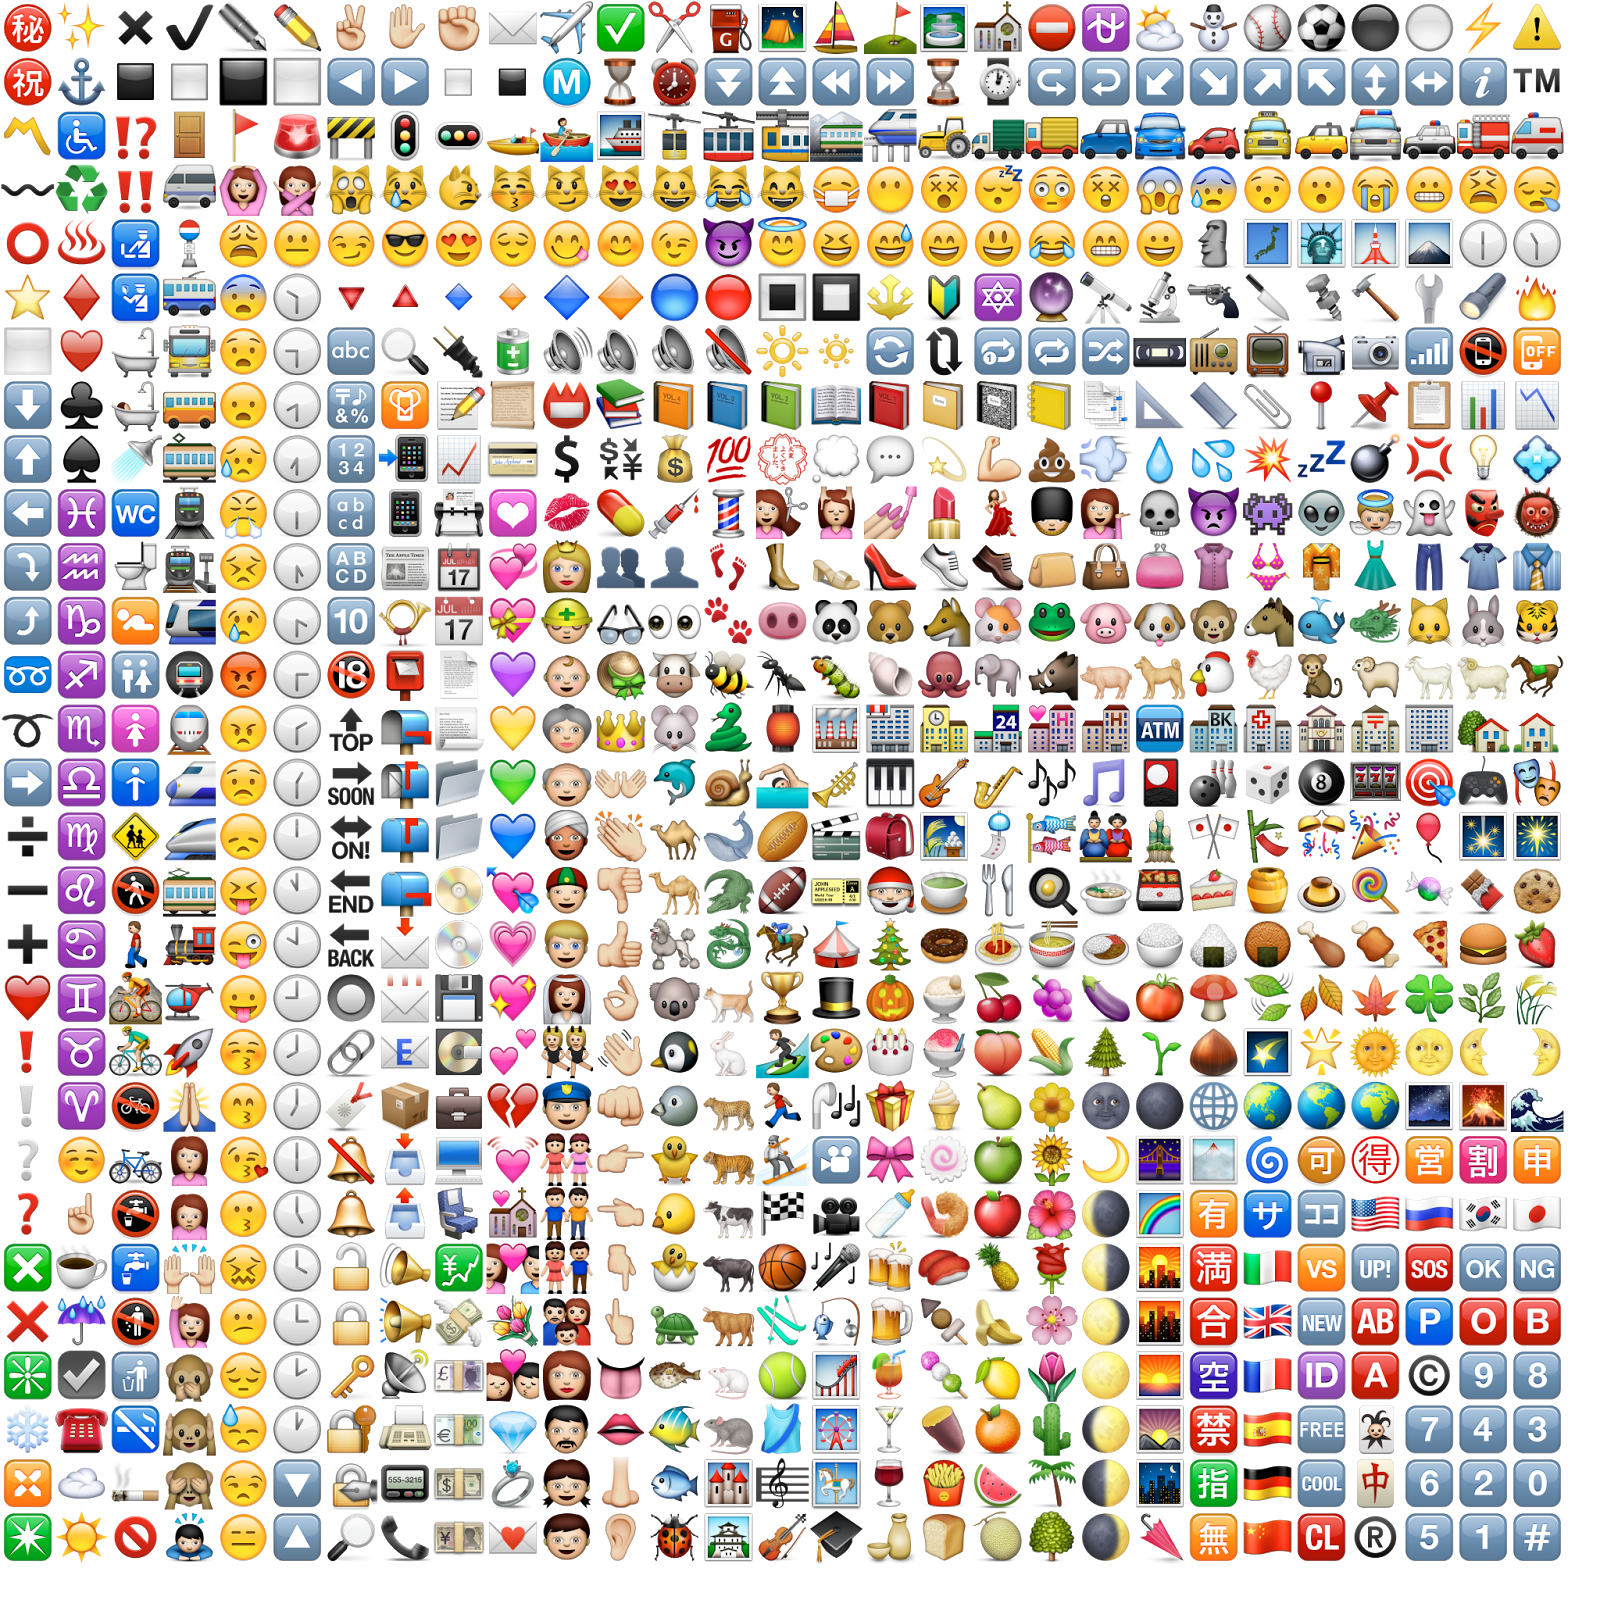 This Is A Large Image Of All The Current Emoji Drag It To Your